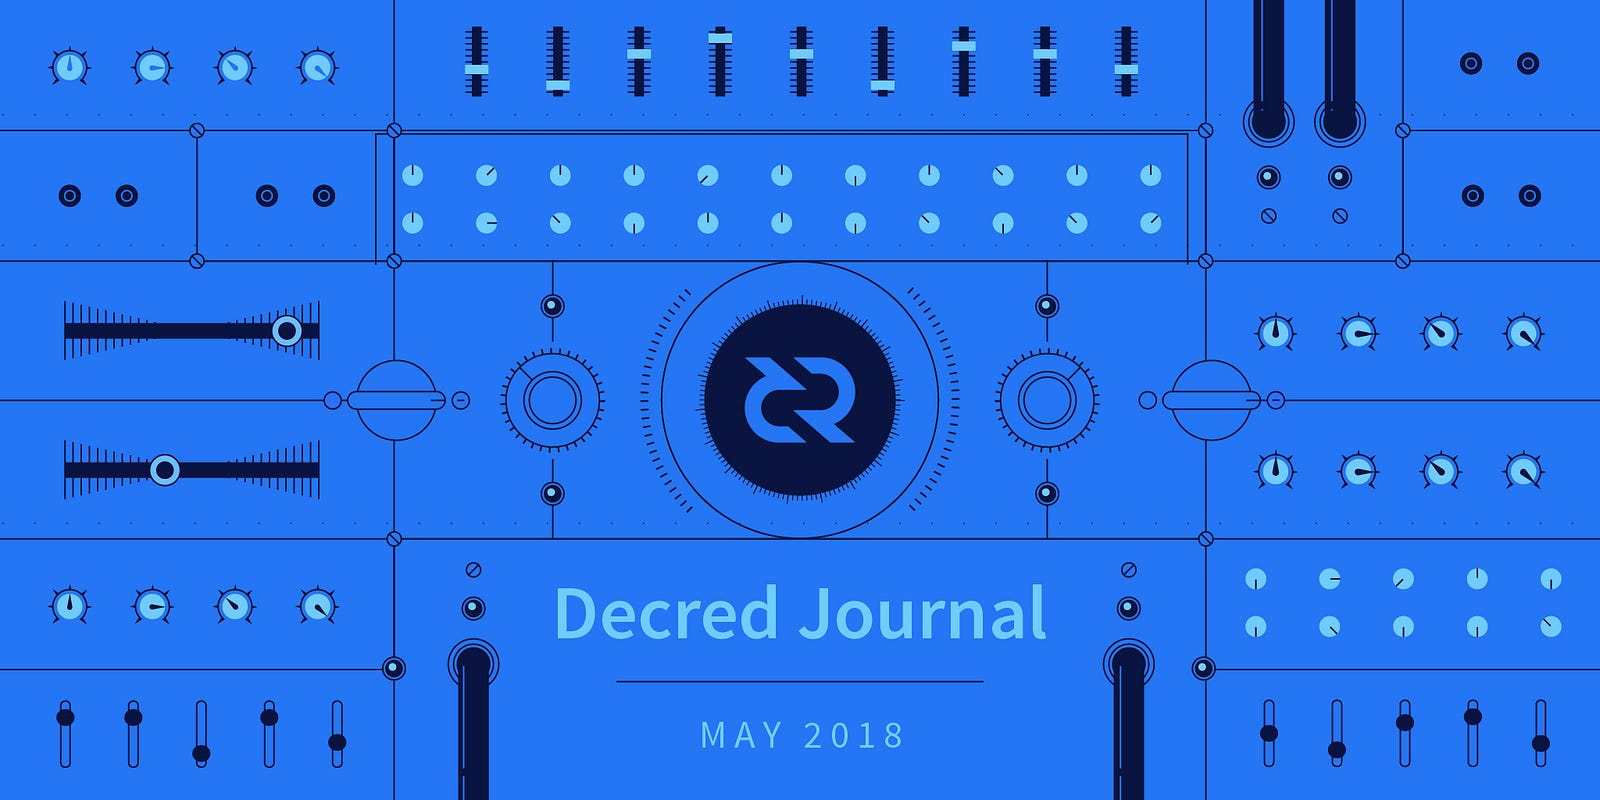 Decred (DCR): Pay Attention to What’s Happening With This Coin